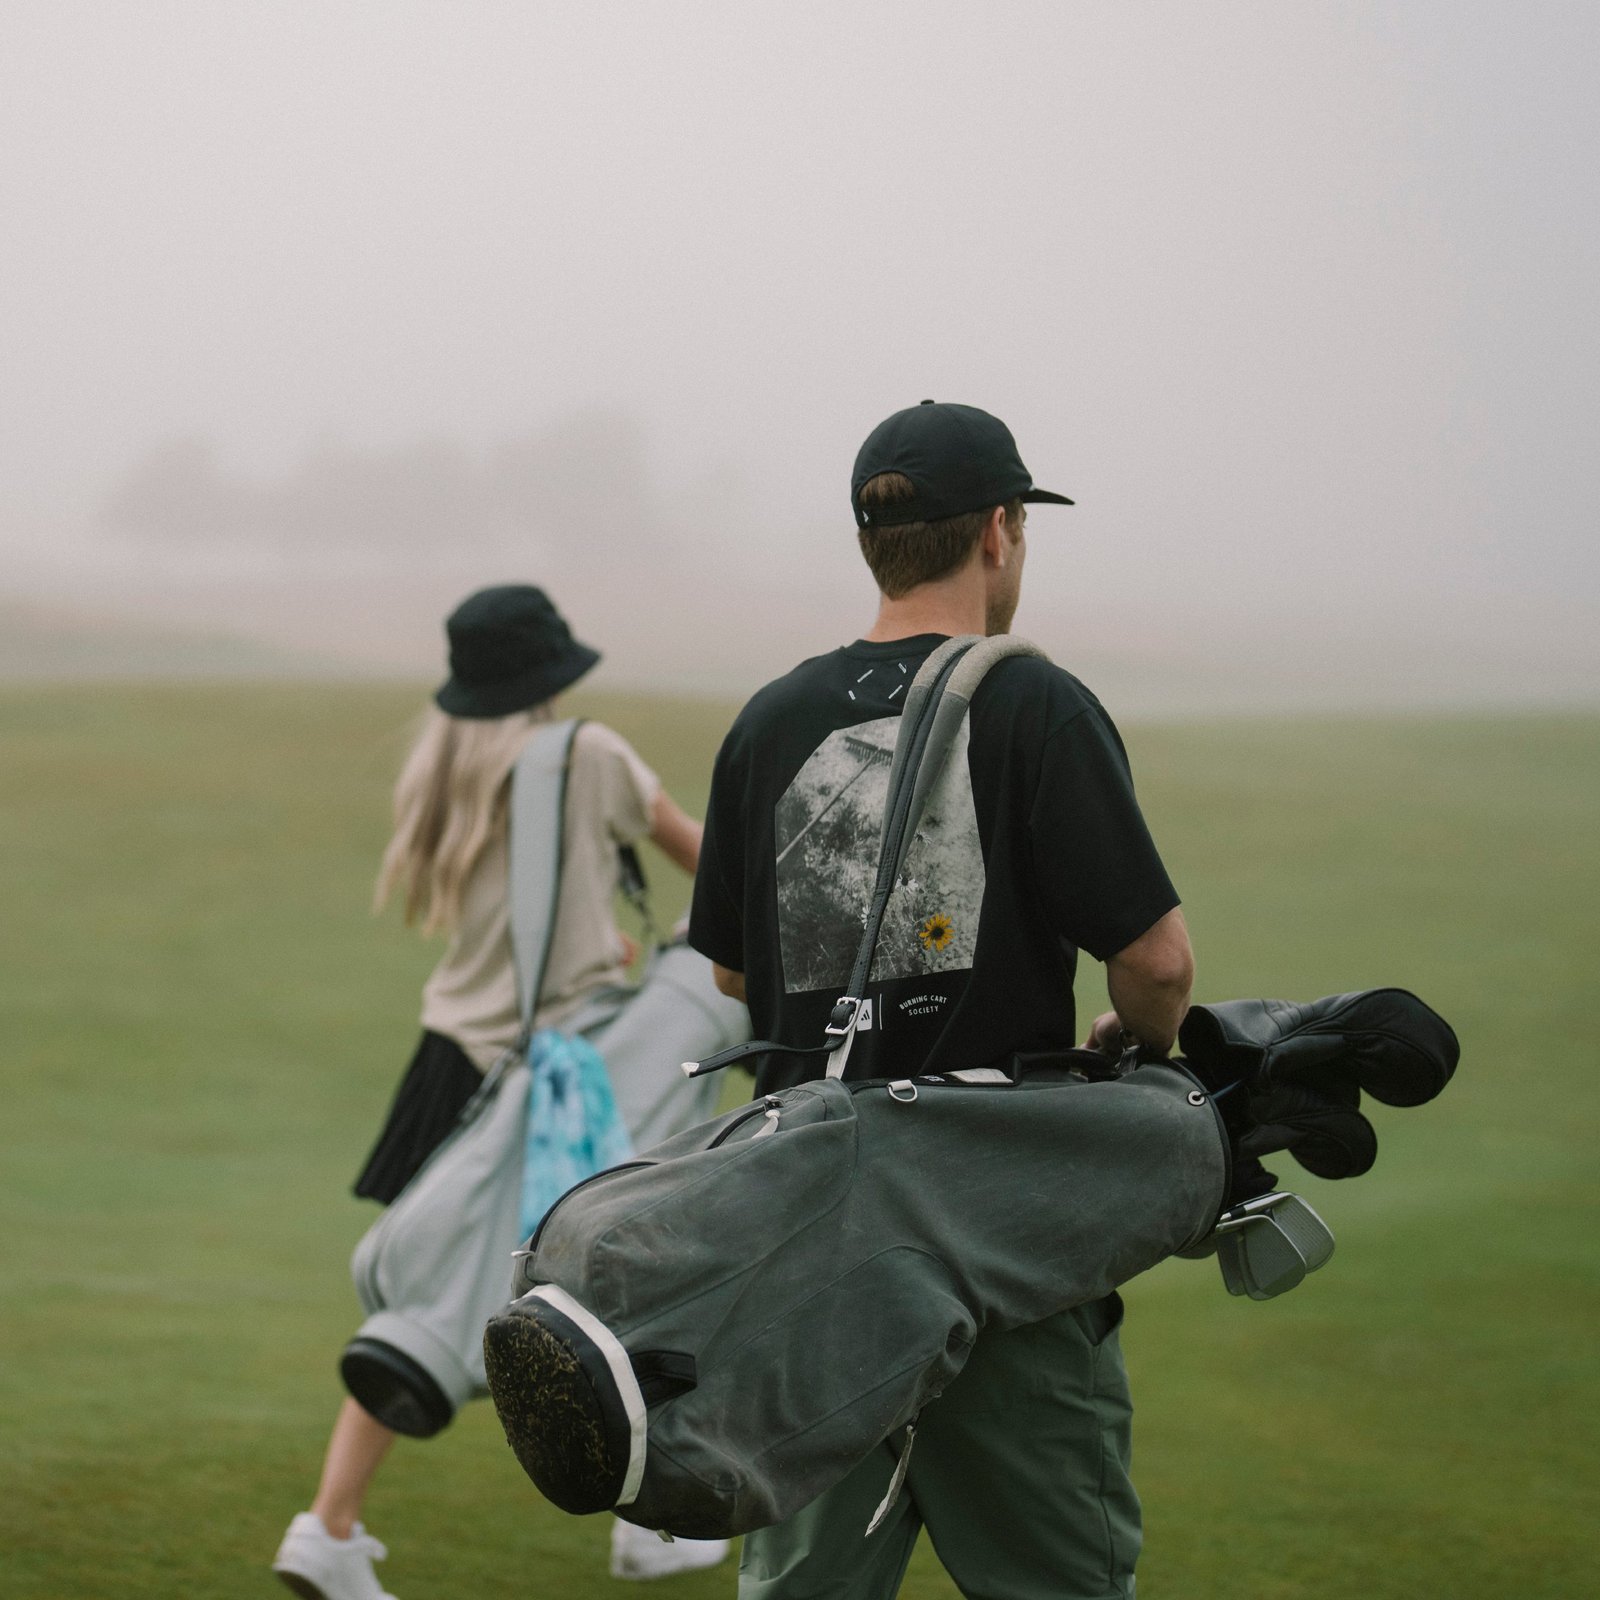 ADIDAS X BURNING CART SOCIETY COLLECTION REMINDS GOLFERS ABOUT THE IMPORTANCE OF NATURE IN THE SPORT © Copyright PLPG GLOBAL MEDIA 2023